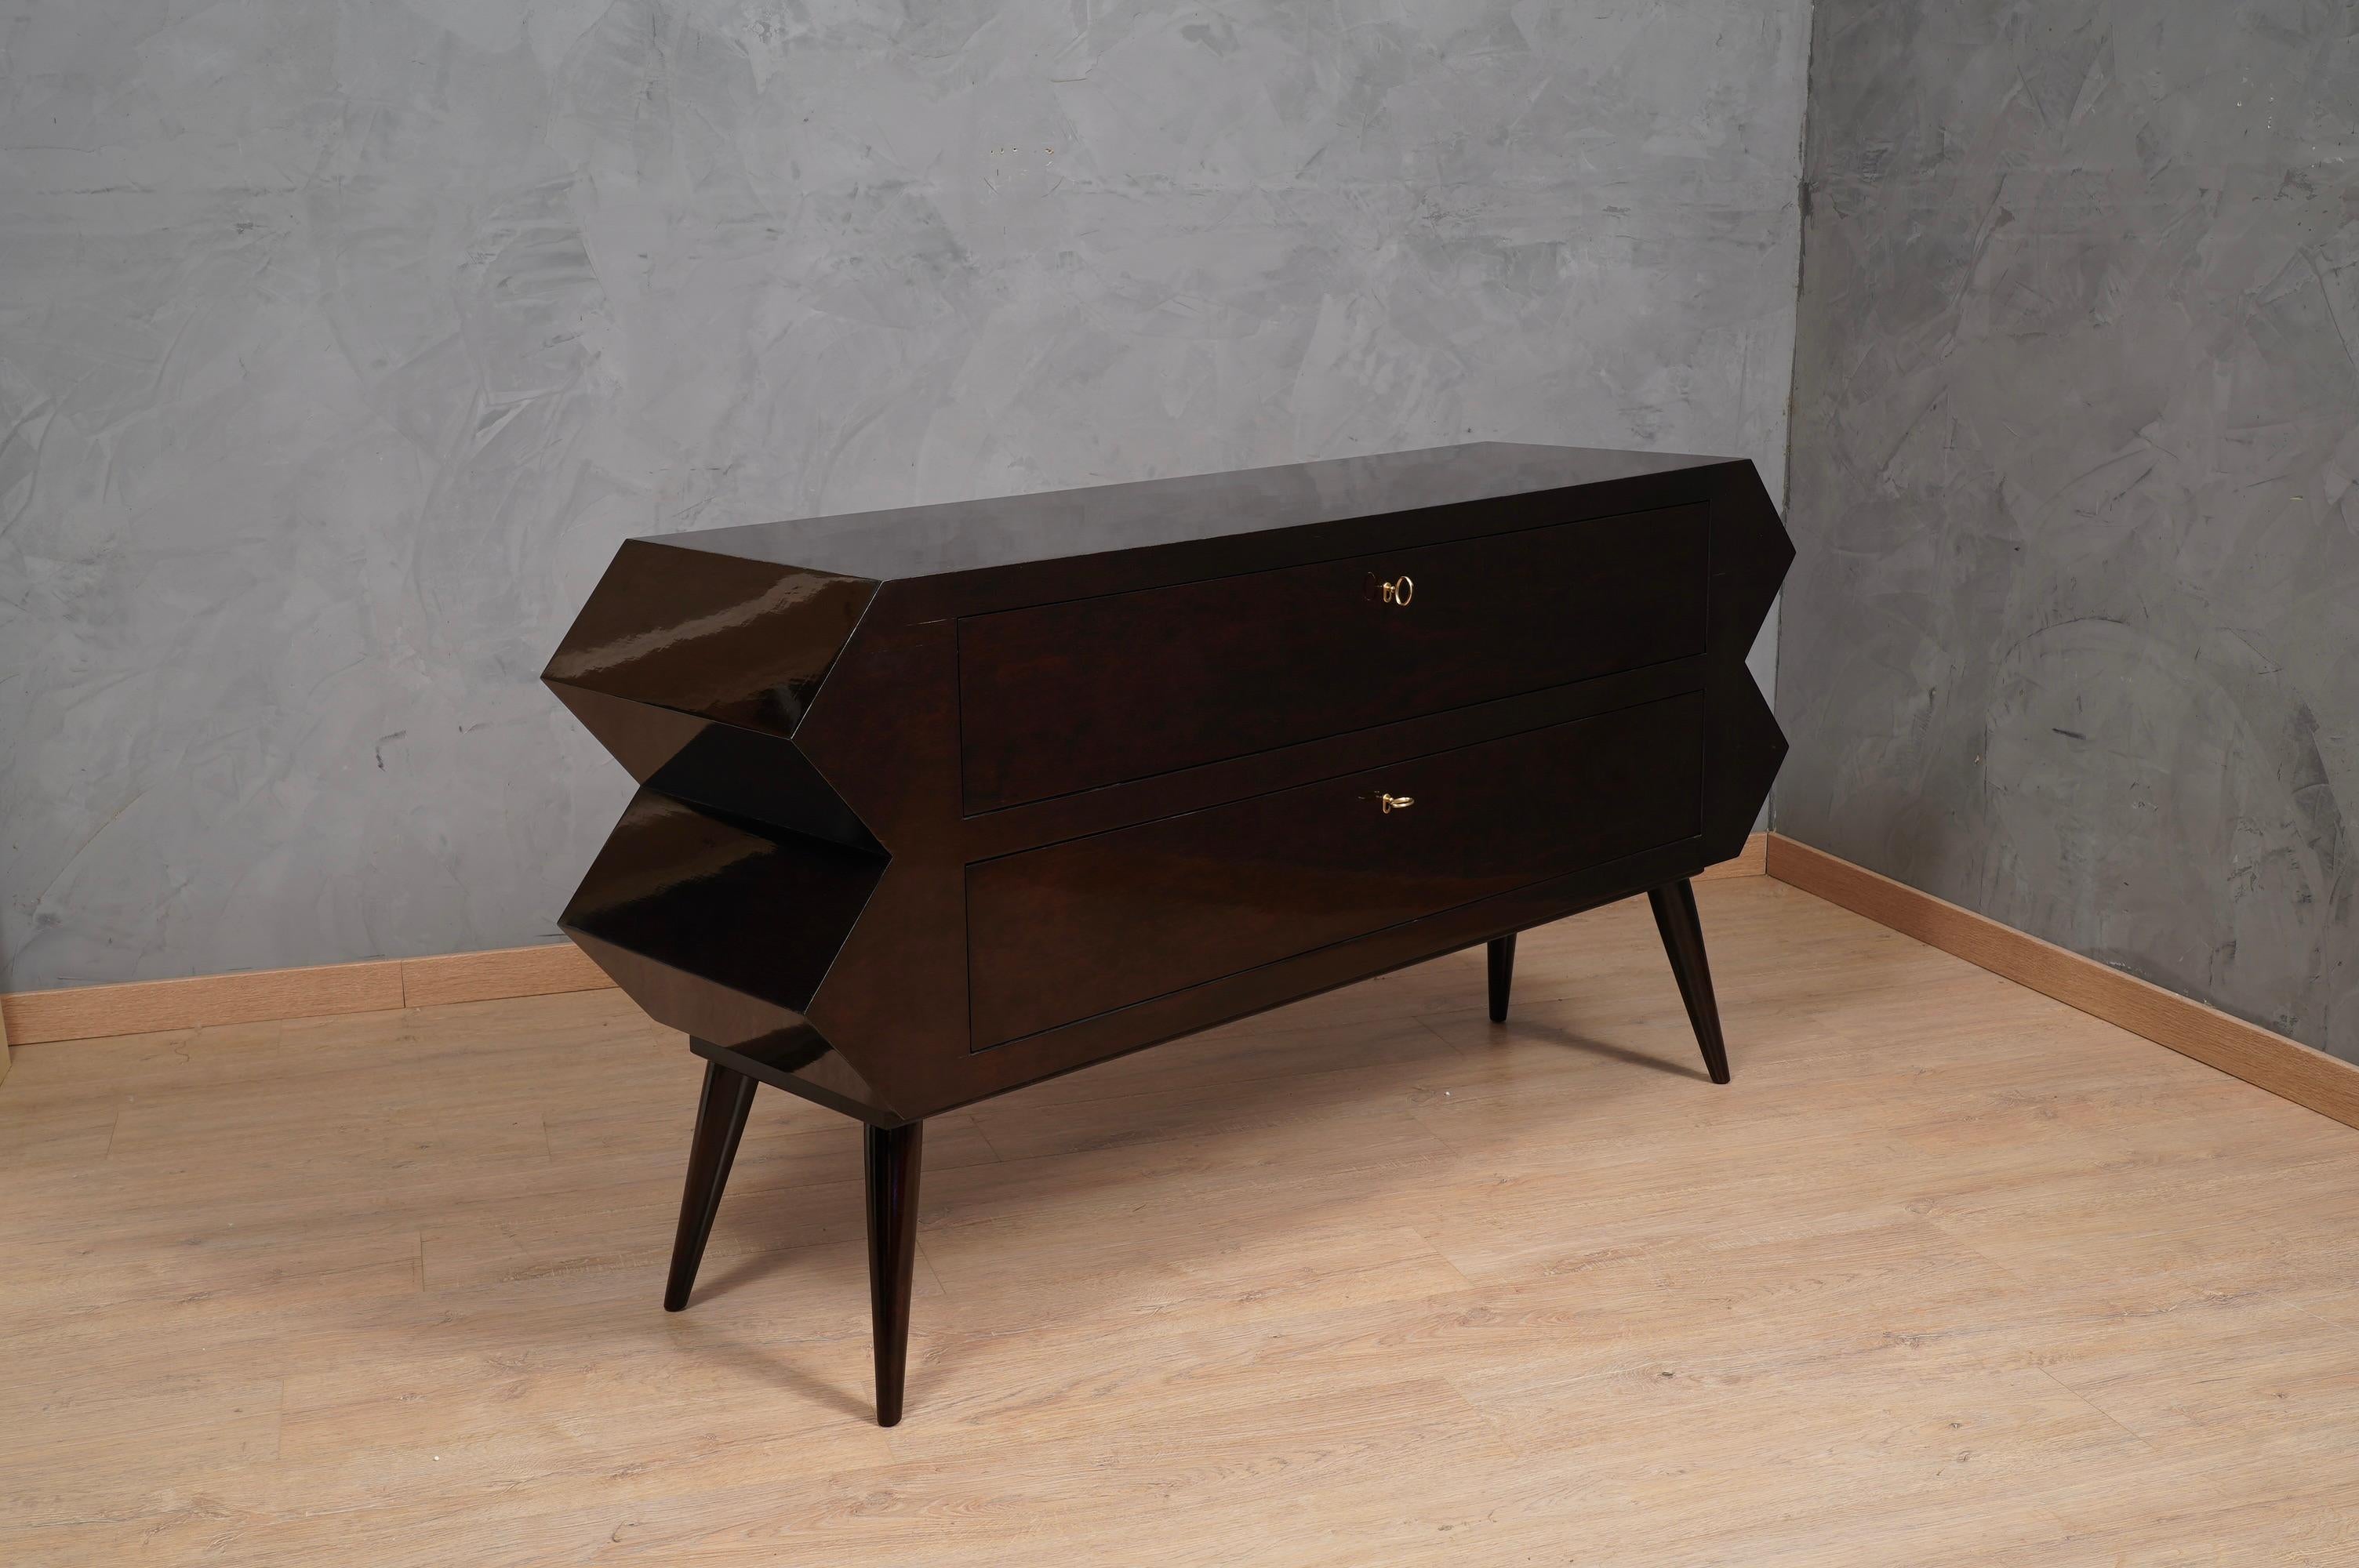 Unmistakable design, and super polishing with dyed dark mahogany shellac. It absolutely cannot be missing in your home.

A beautiful dresser with a surprising design, the commode is all dyed dark mahogany polished like a piano; its design is very